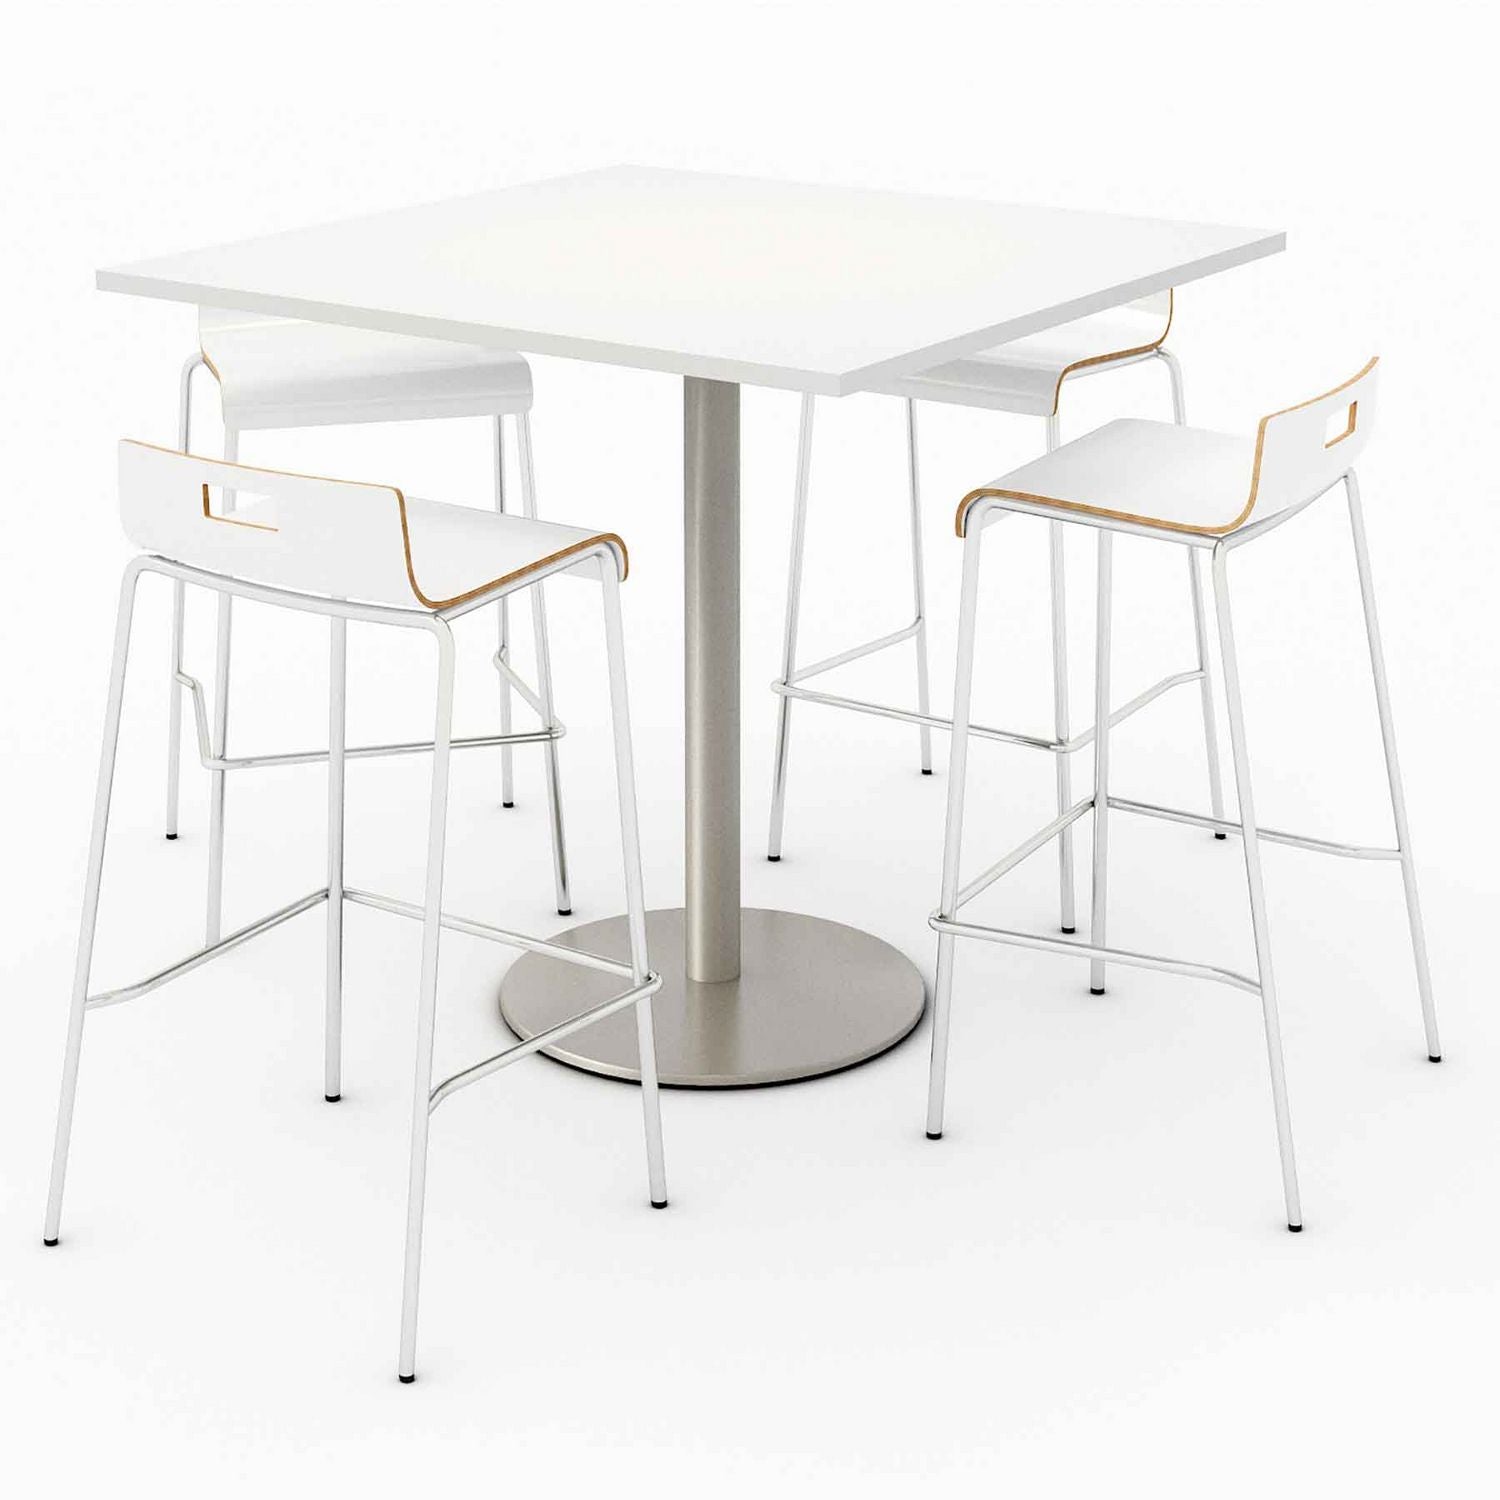 pedestal-bistro-table-with-four-white-jive-series-barstools-square-36-x-36-x-41-designer-white-ships-in-4-6-business-days_kfi811774039918 - 1